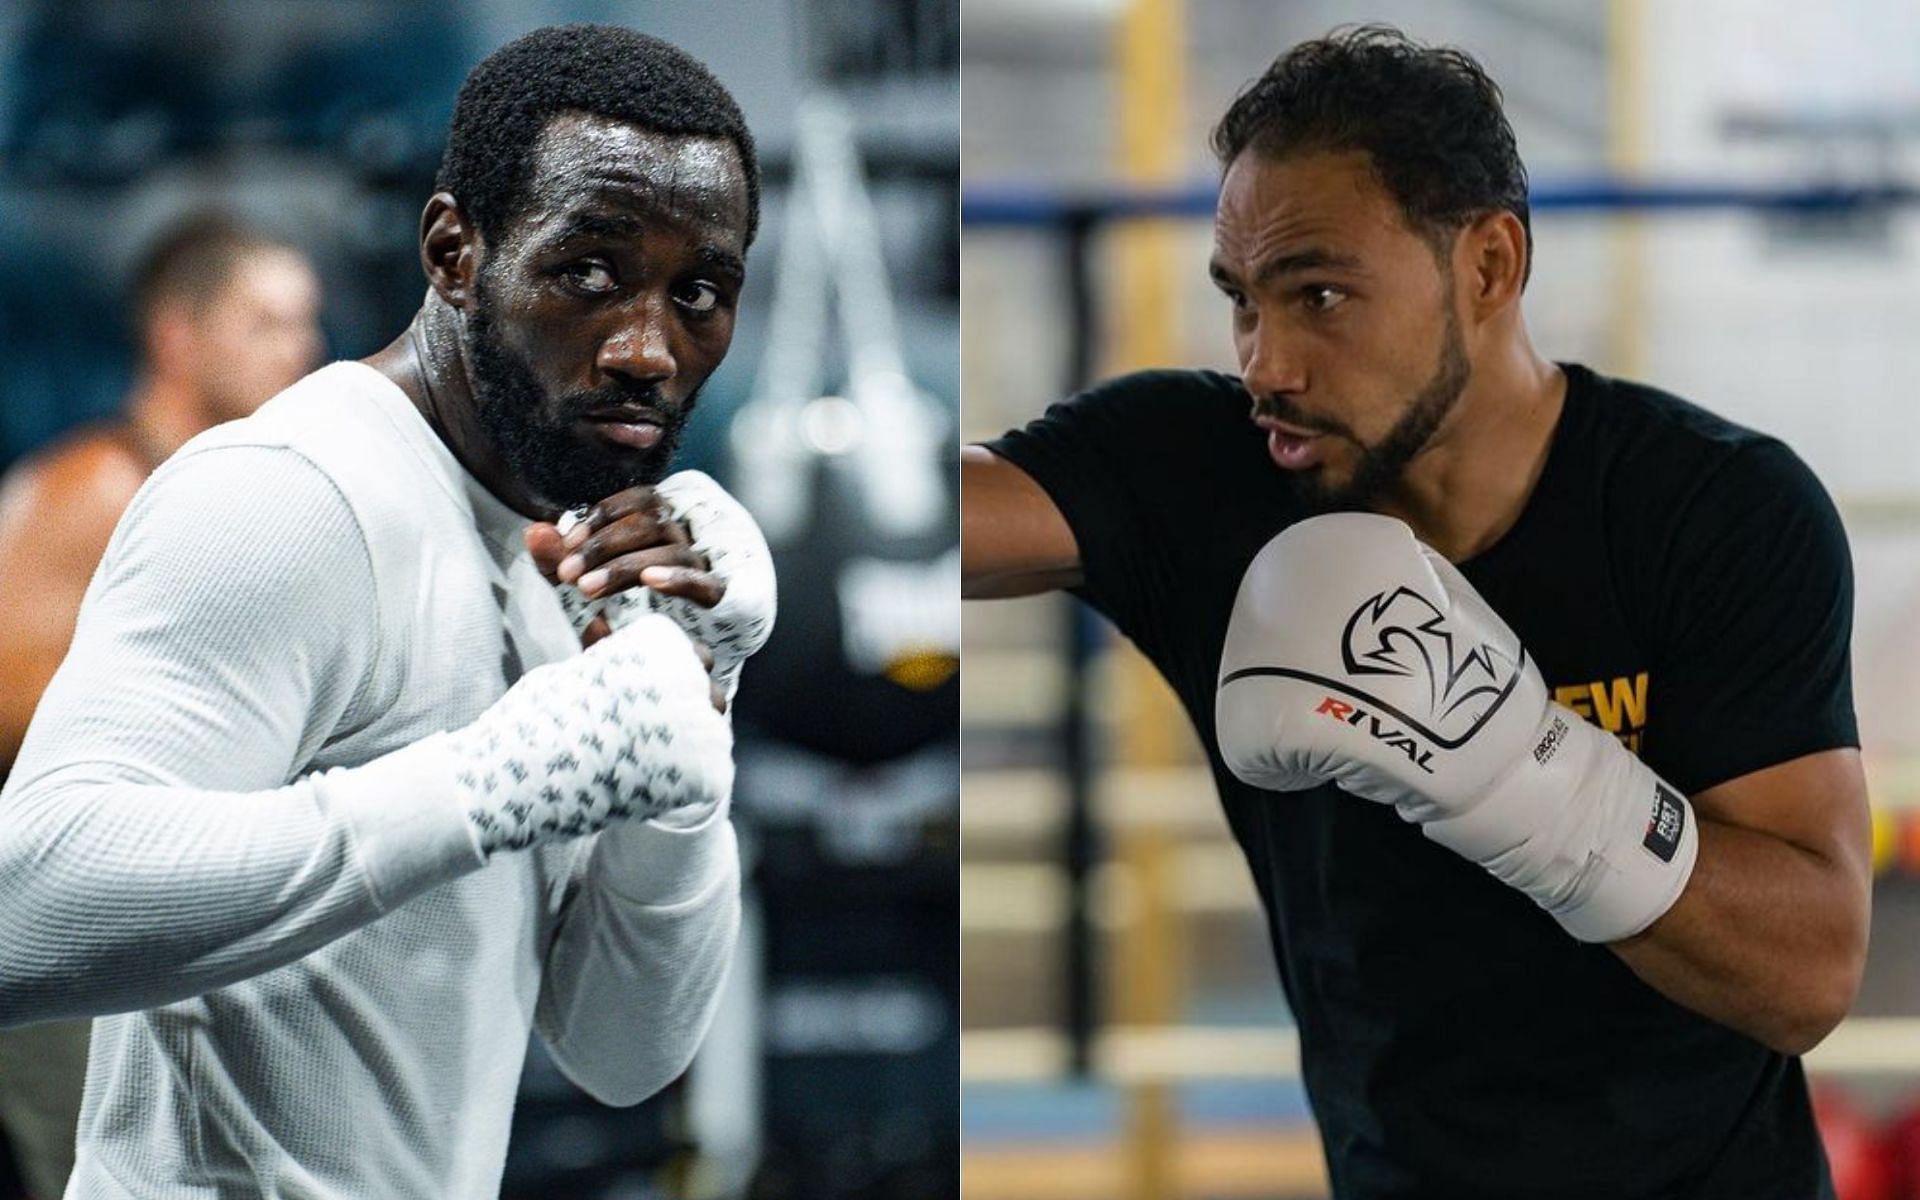 Terence Crawford (left) and Keith Thurman (right) [Image credits: @tbudcrawford and @keithonetimethurman on Instagram]